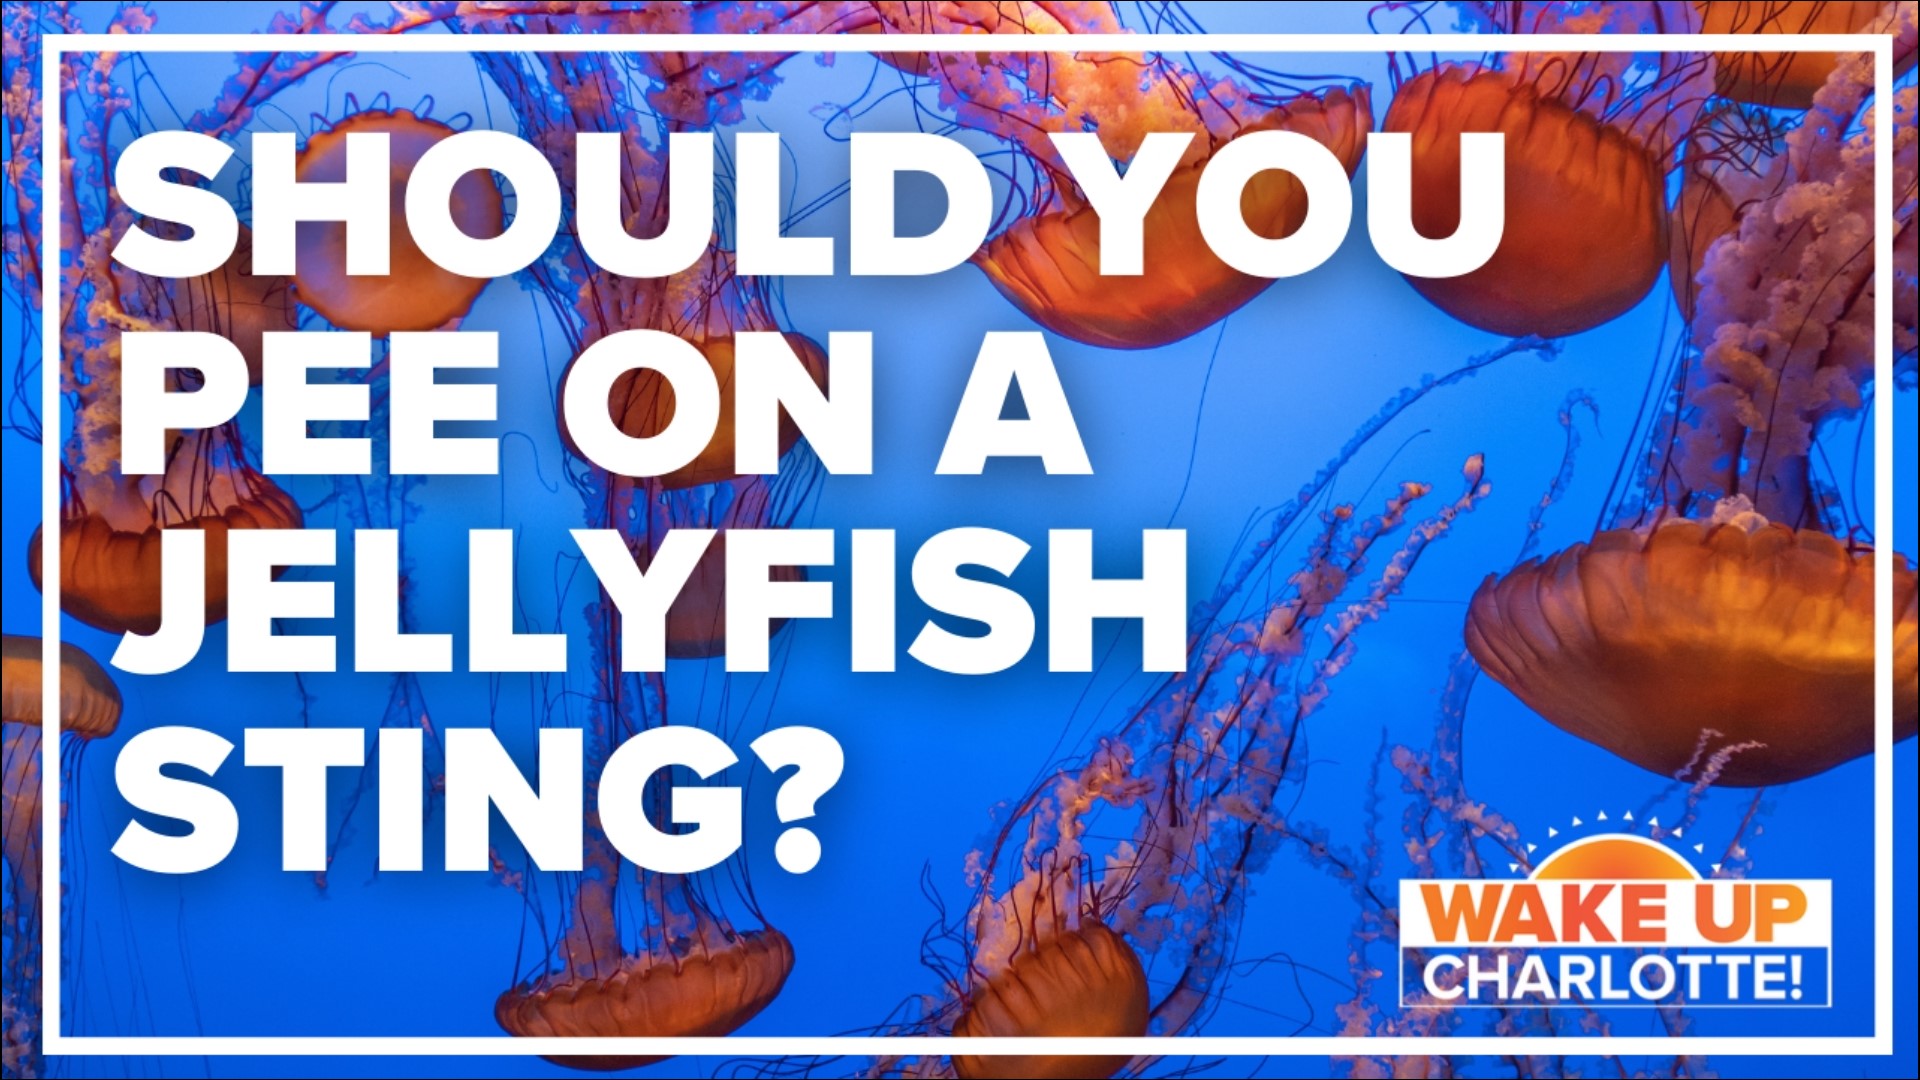 You've probably heard that old wives' tale and probably seen it in movies and read it in books. People claim peeing on a jellyfish sting is the best cure.